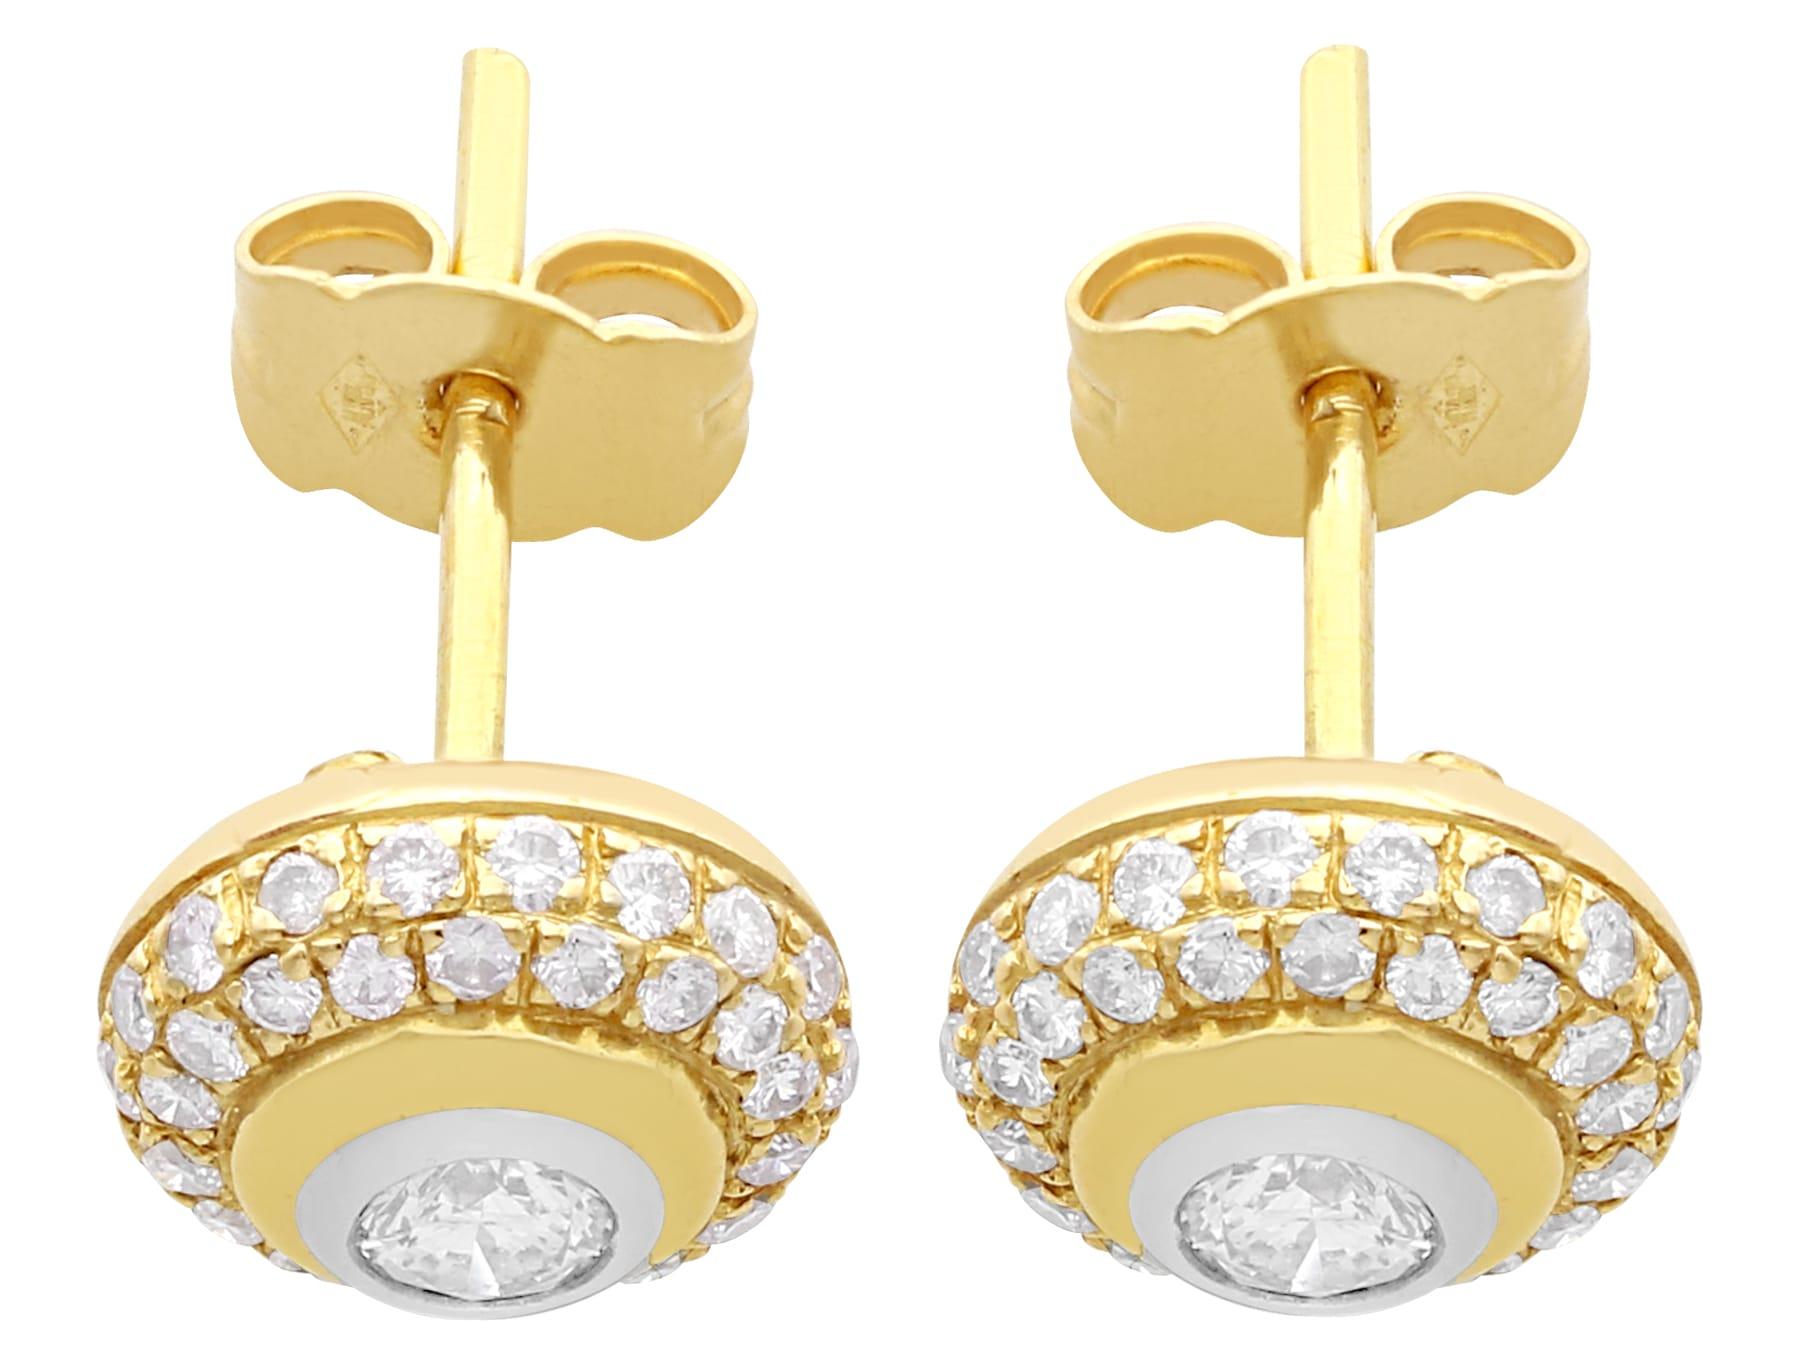 A fine and impressive pair of vintage 0.88 carat diamond and 18 karat yellow gold, silver set cluster earrings; part of our vintage jewelry and estate jewelry collections.

These fine vintage diamond earrings have been crafted in 18 karat yellow